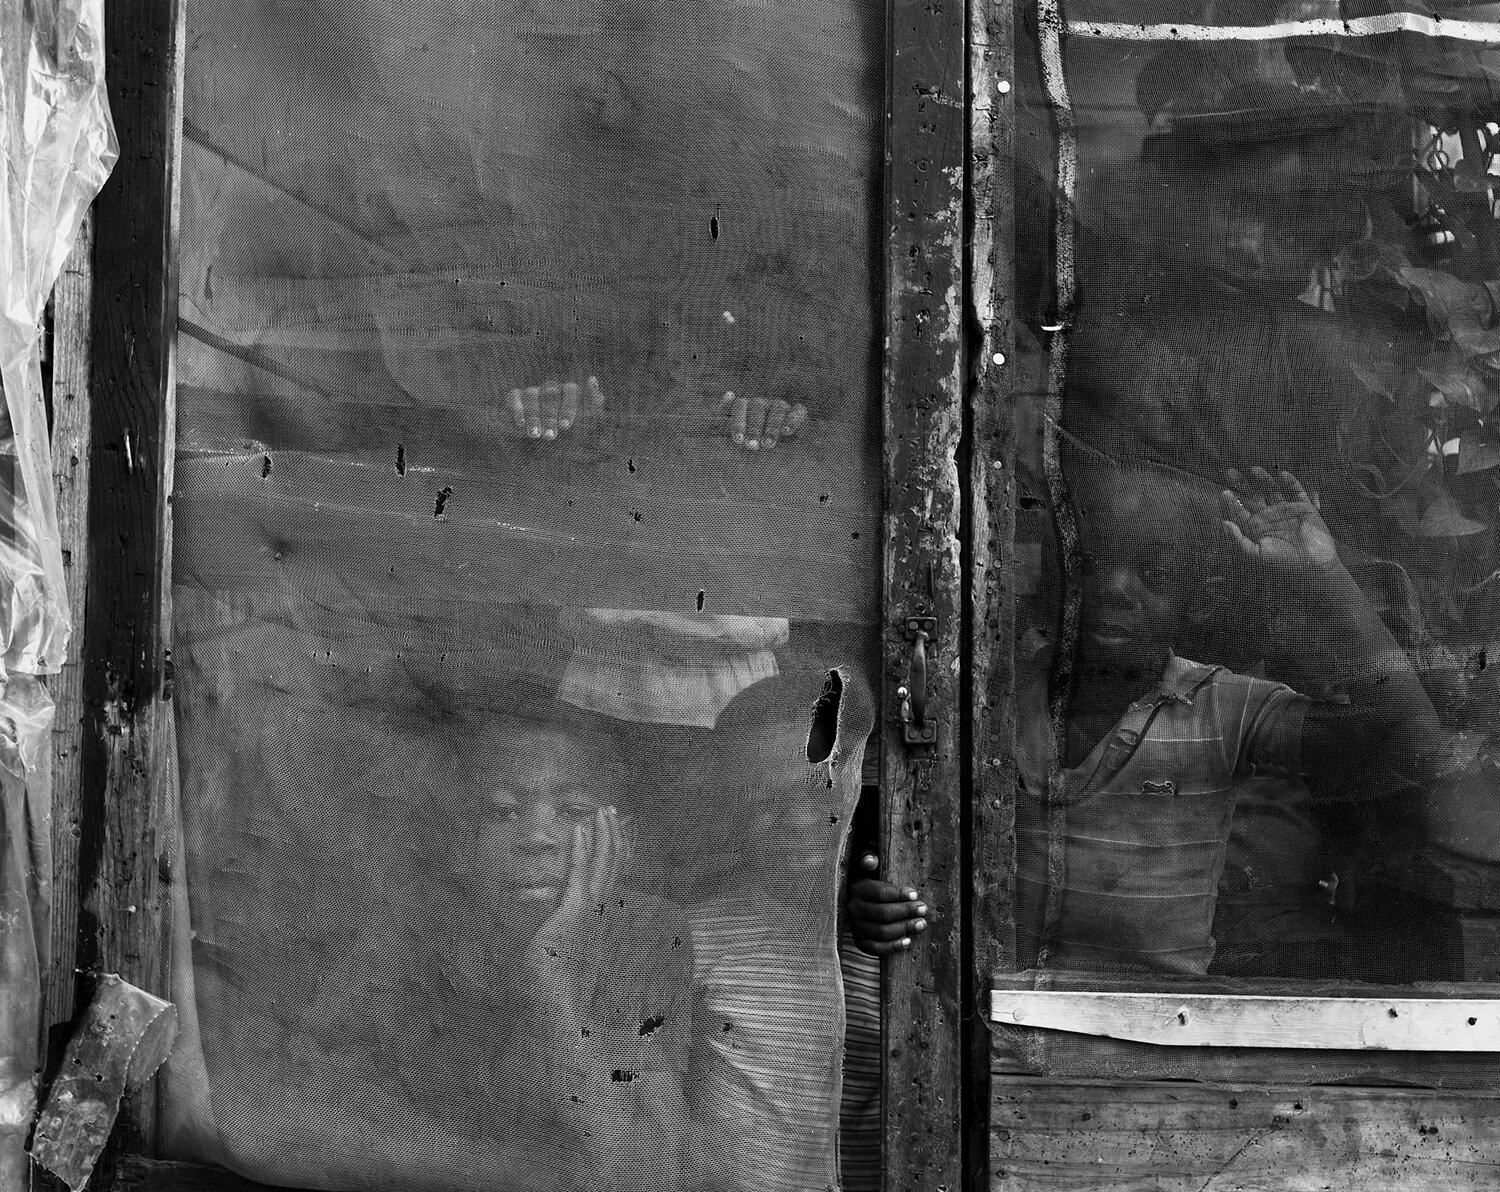   Children Behind Screen Door, Rosedale, MS , 1986 Archival pigment print  15 × 19 in. (image size) The Do Good Fund, Inc., 2016-28 